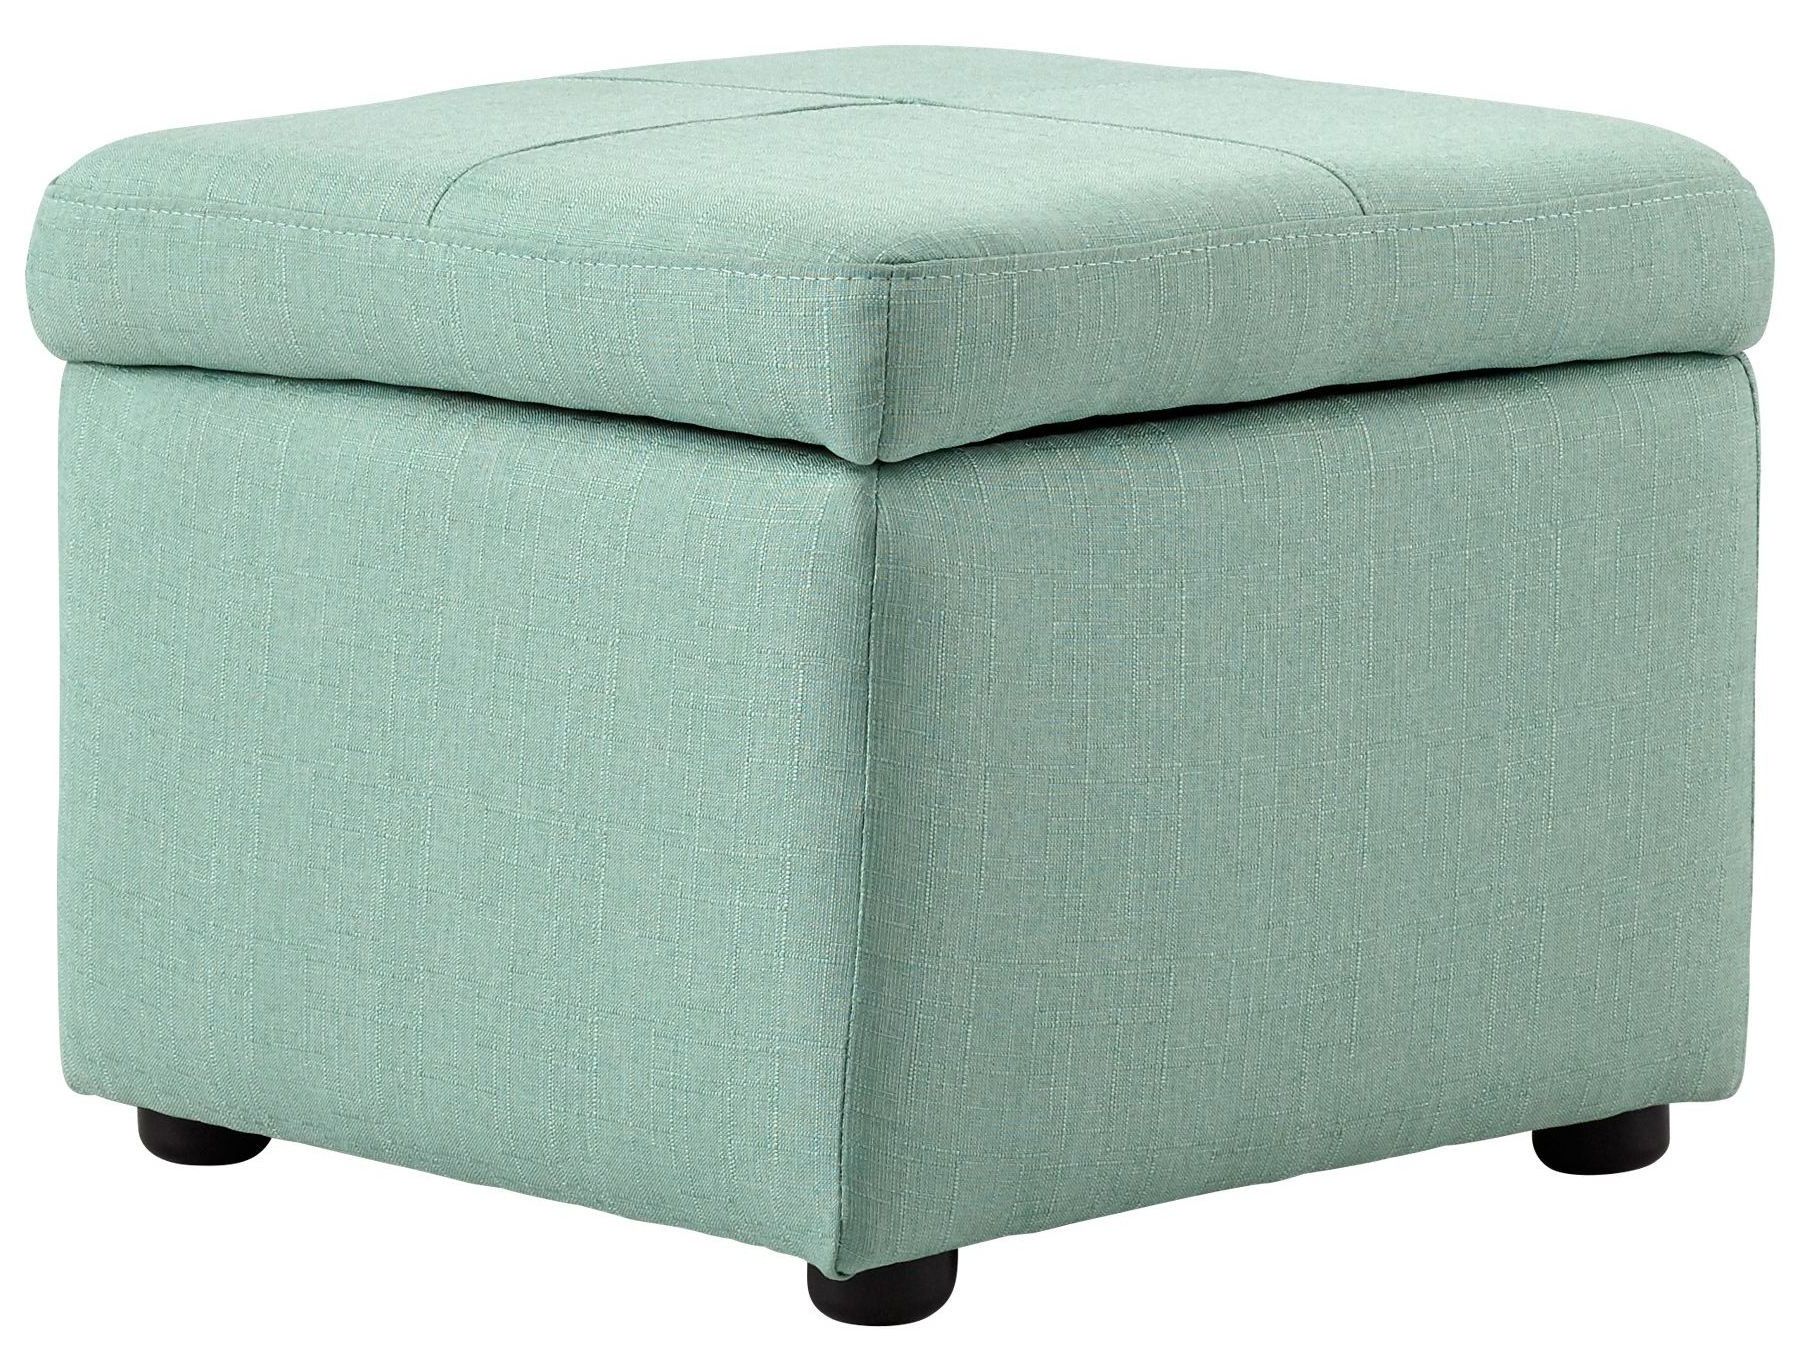 Most Up To Date Green Pouf Ottomans Pertaining To Huffington Green Ottoman, 8346, Cyan Design (View 7 of 10)